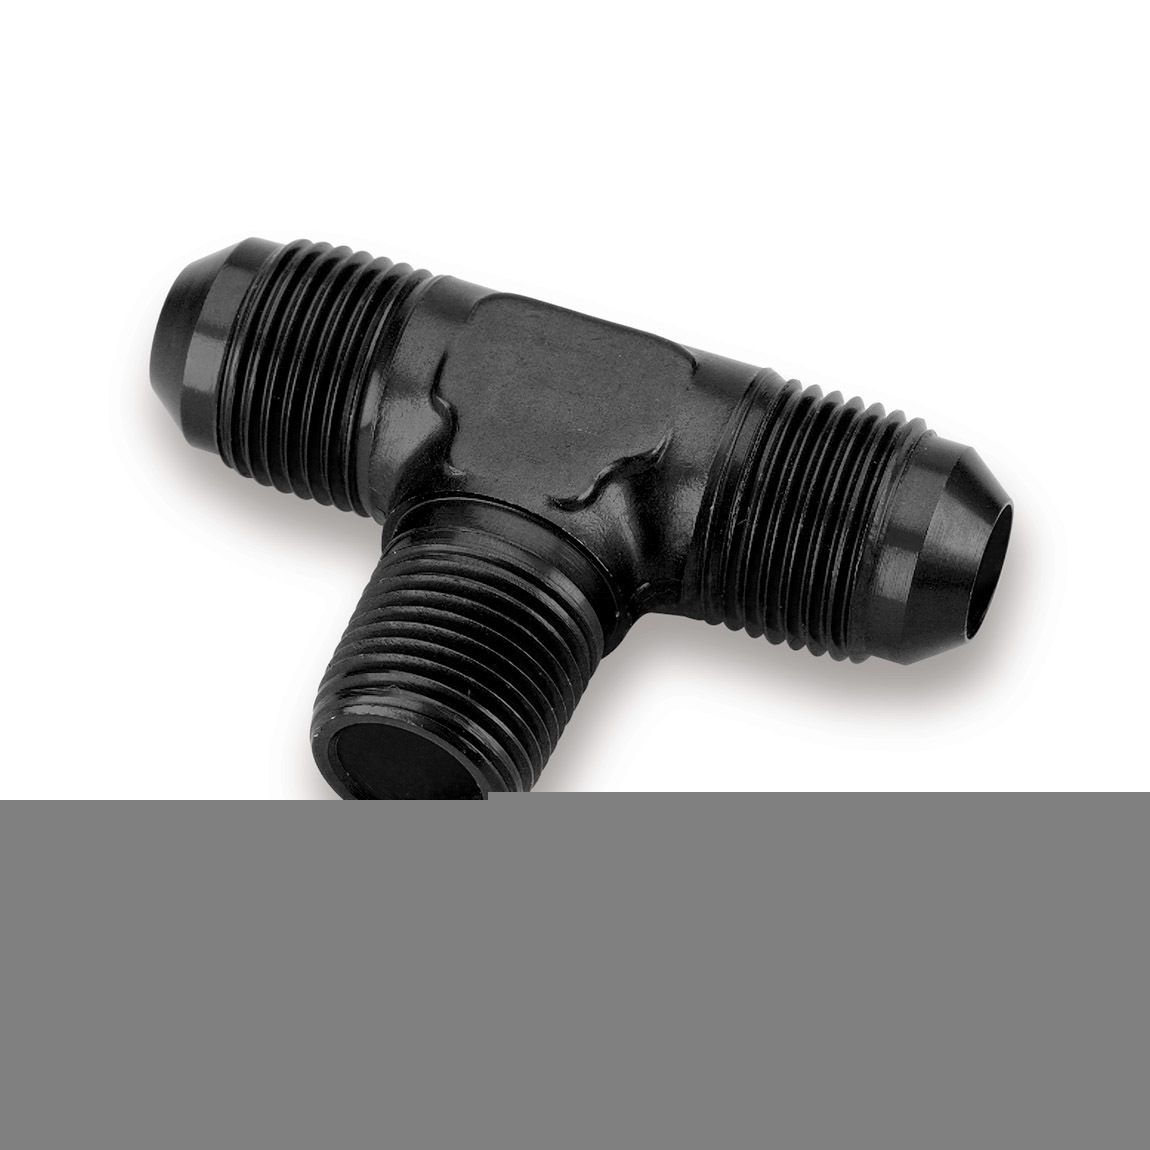 Earls AT982506ERL Fitting, Adapter Tee, 6 AN Male x 6 AN Male x 1/4 in NPT Male, Aluminum, Black Anodized, Each